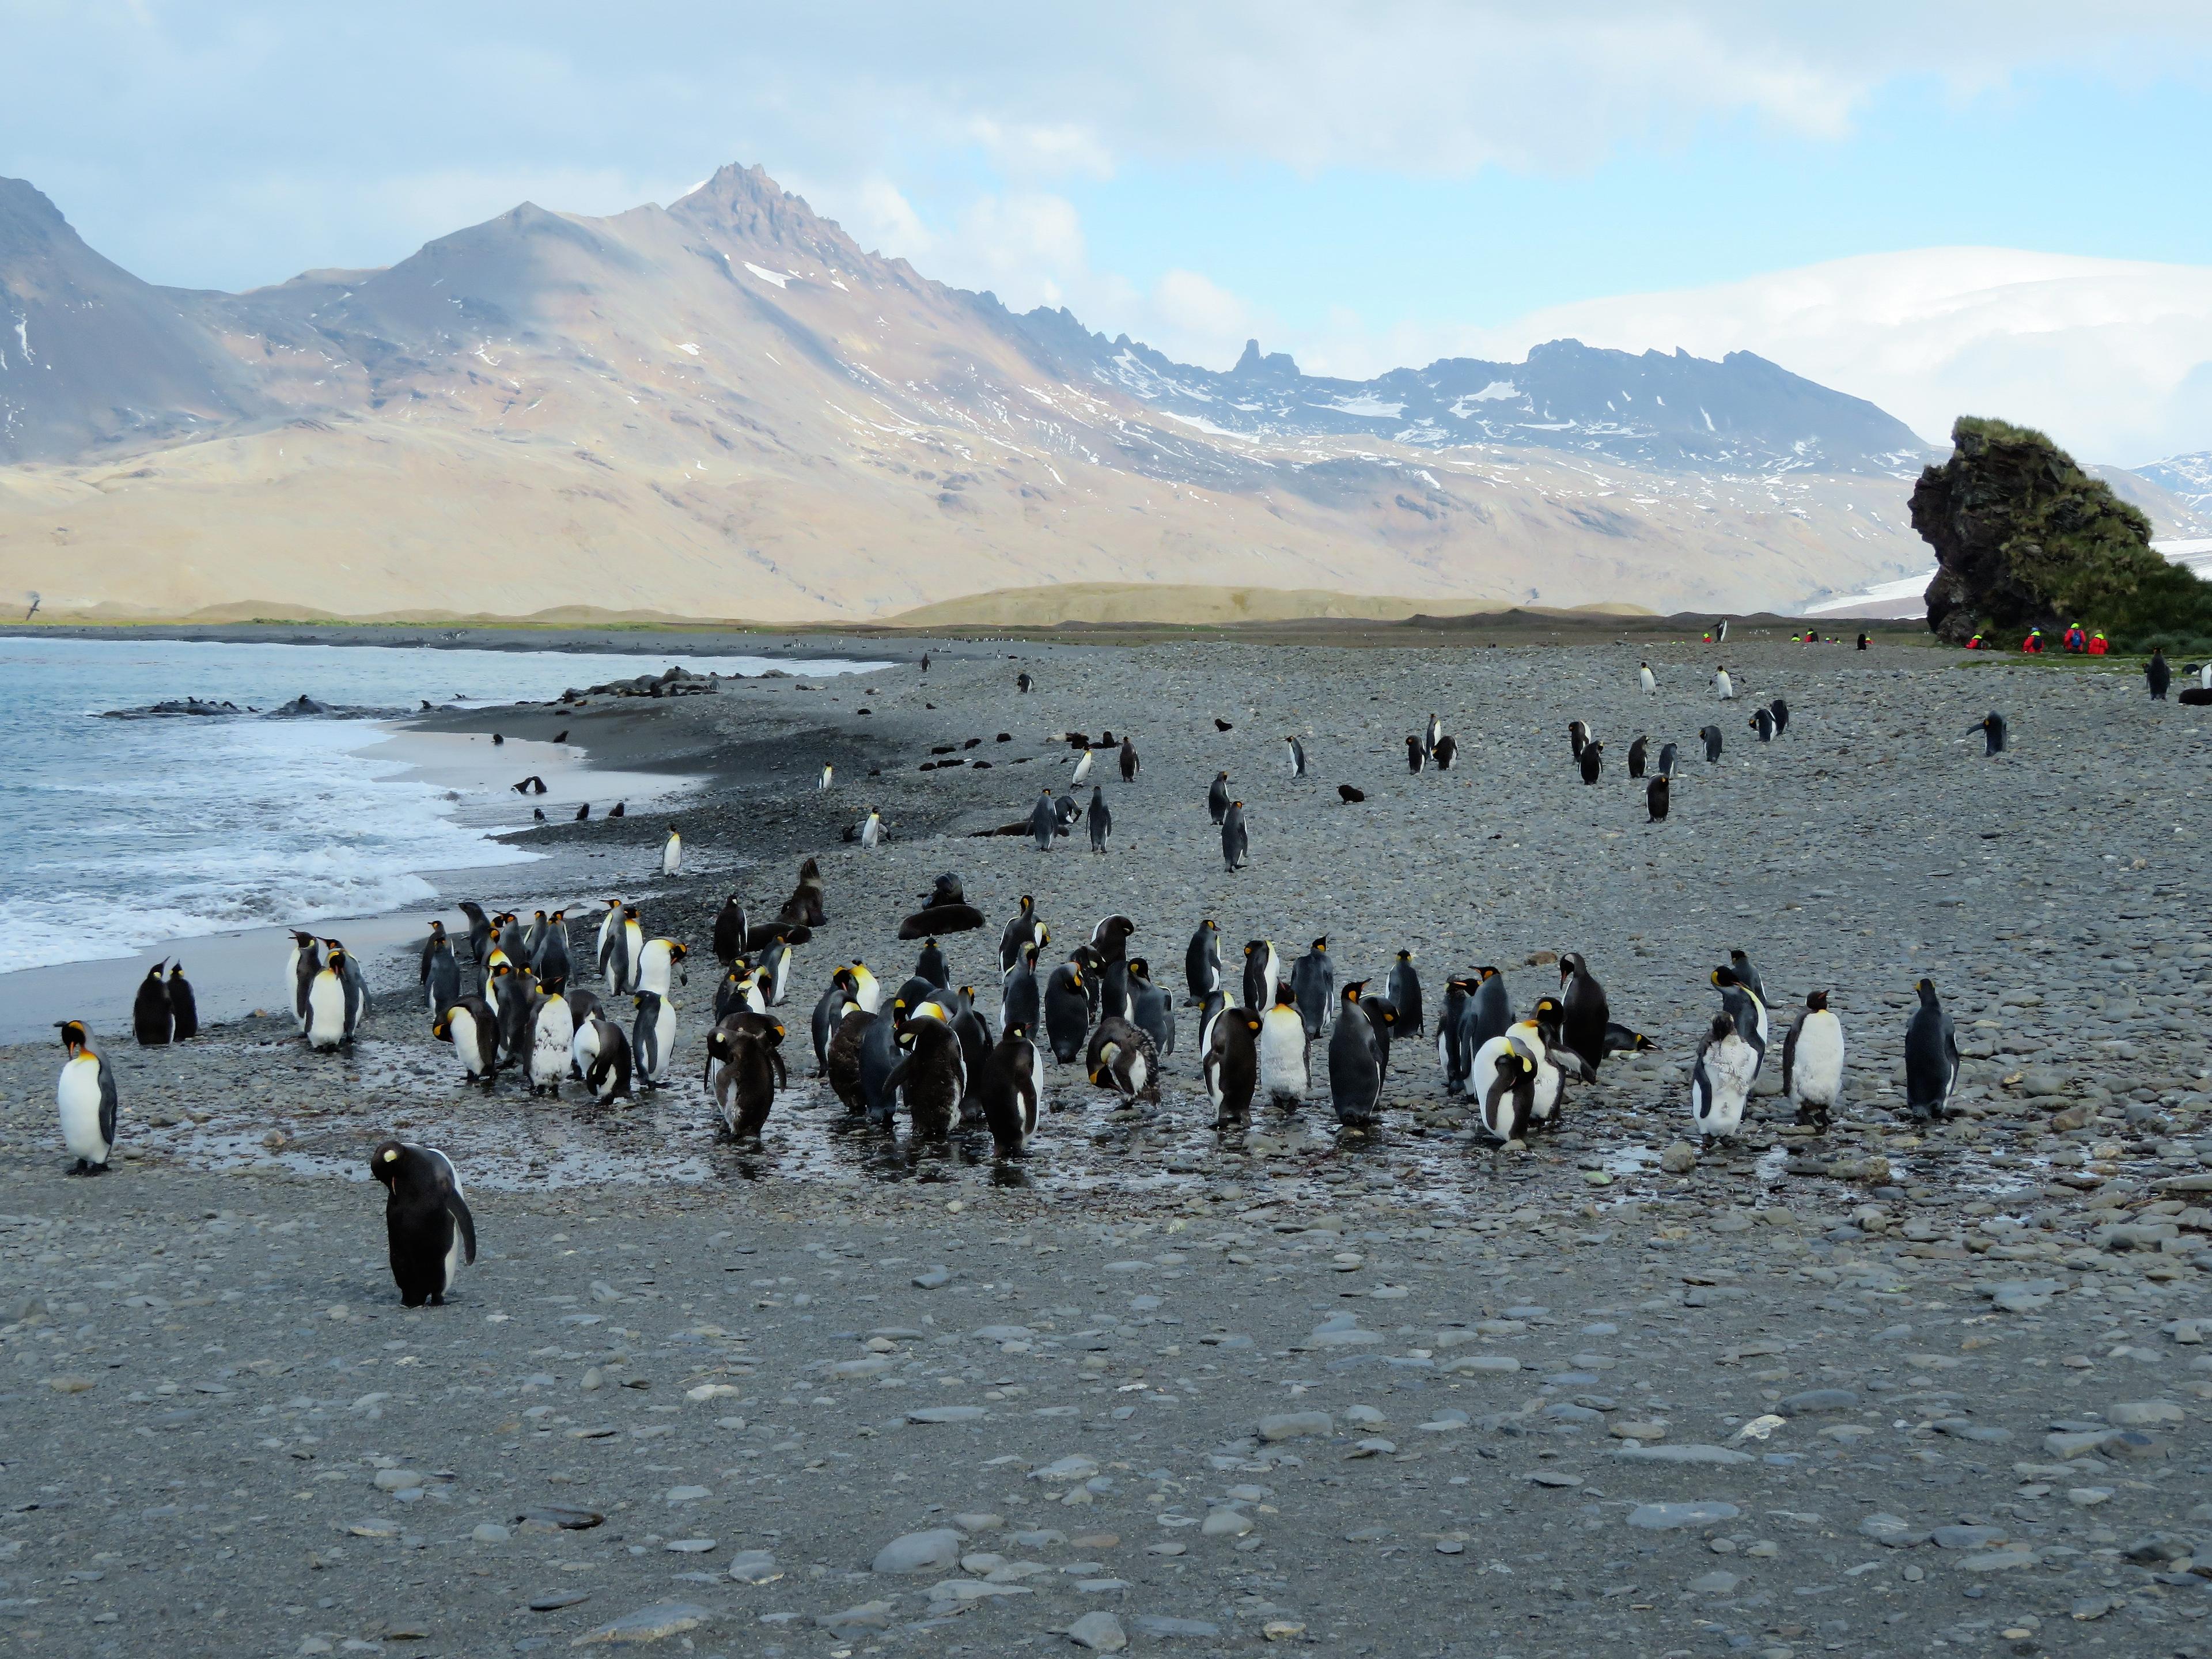 Expedition cruising emerges, from the holy grail - Antarctica to Panama and beyond